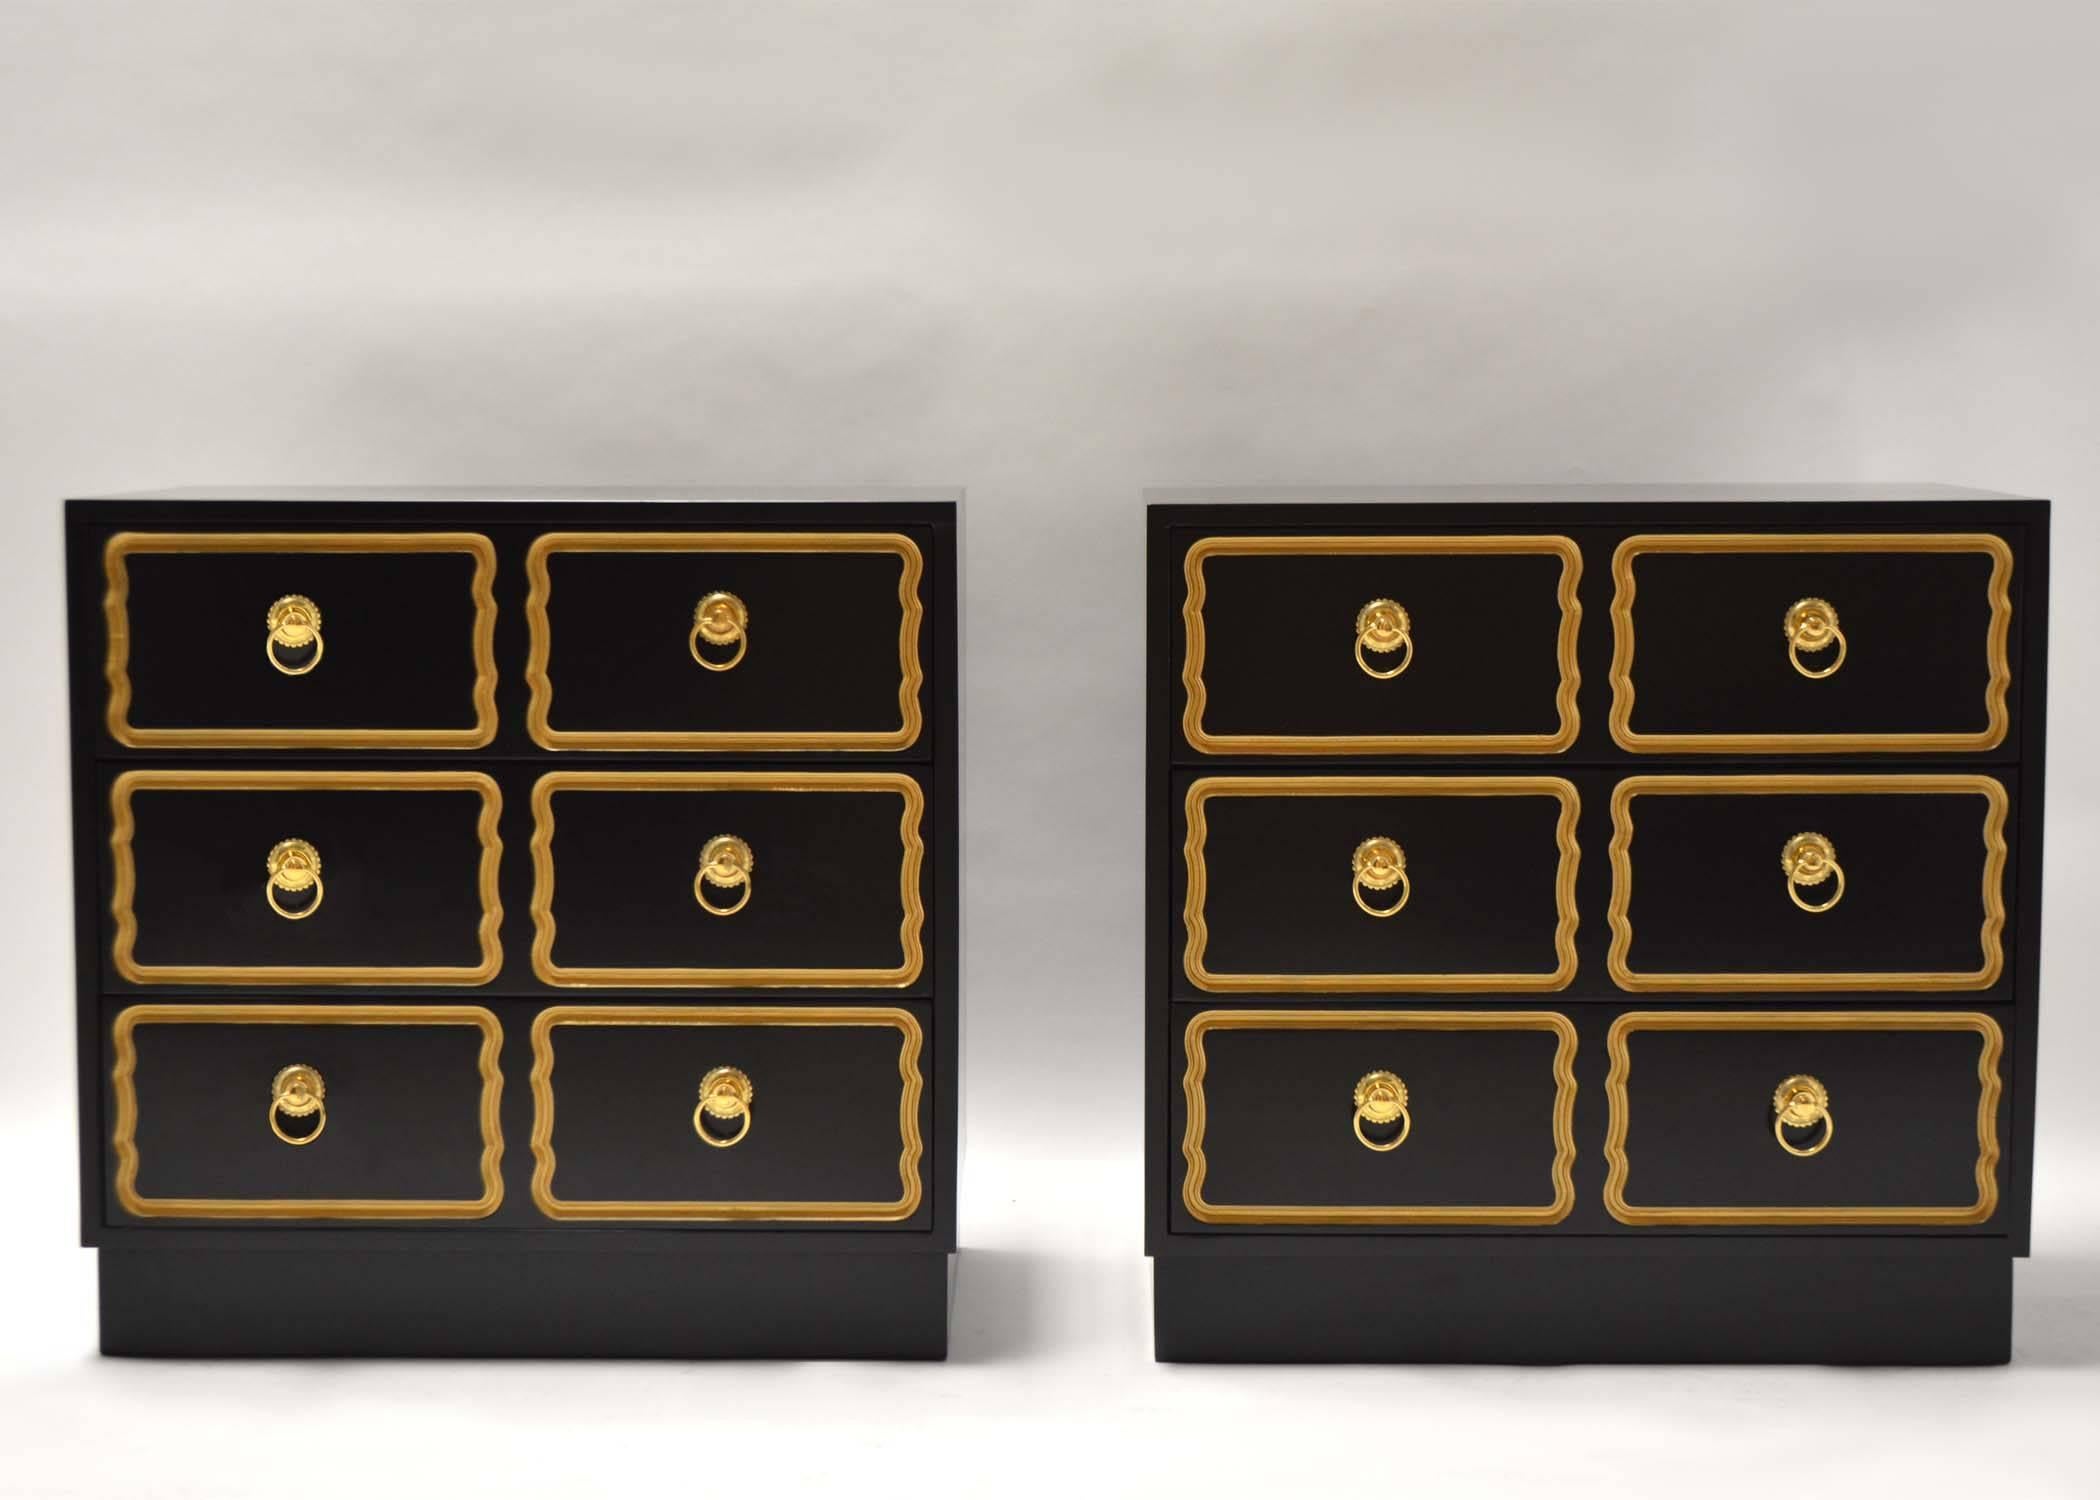 Pair of three-drawer Dorothy Draper Espana chests or nightstands for Heritage Henredon with new black lacquer finish. Brass ring pulls are replacements, on black lacquered drawer fronts with incised gold decoration.